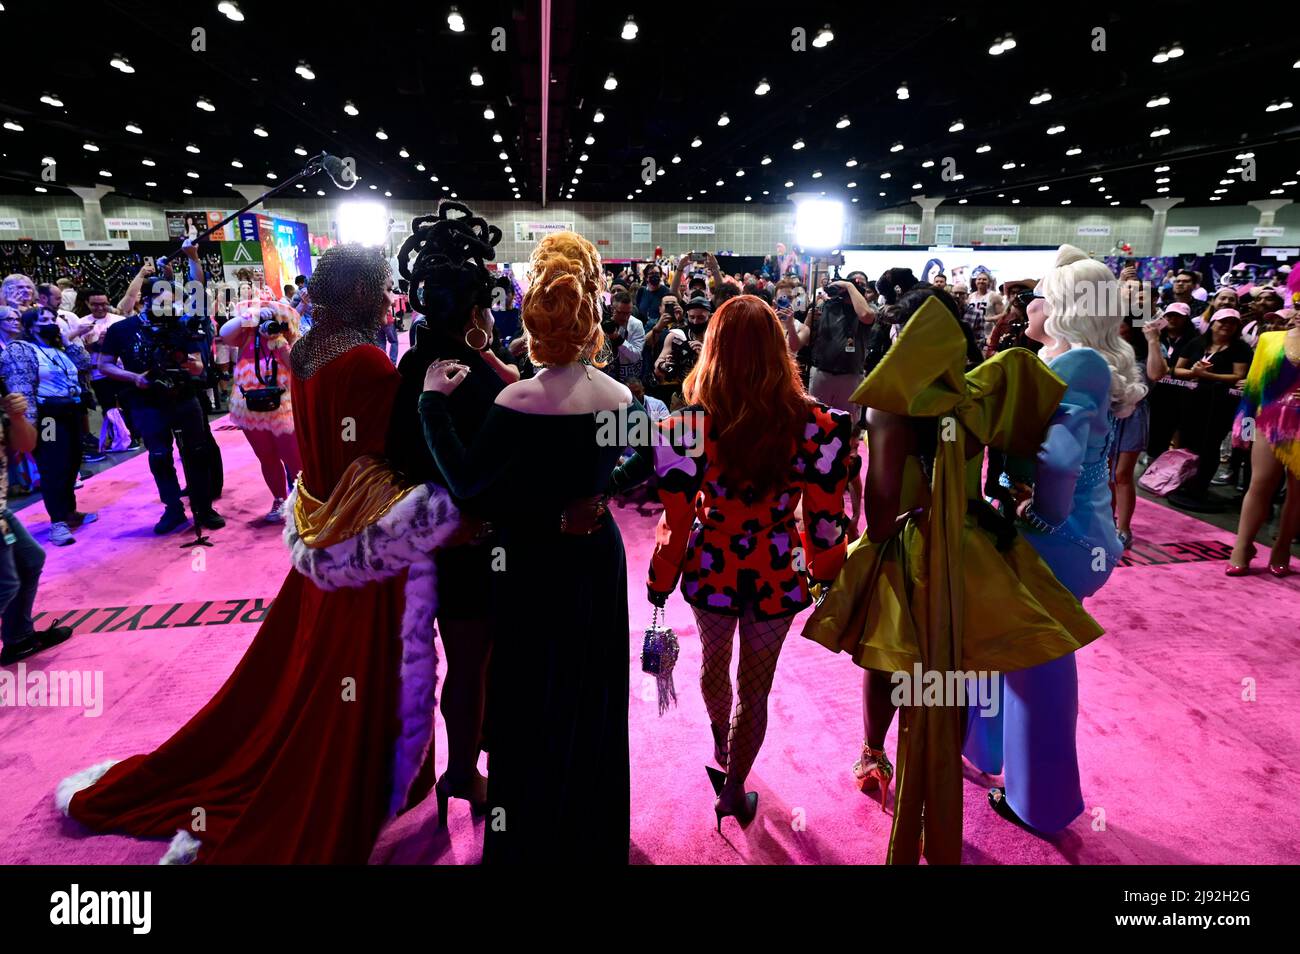 (From R) Cast members The Vivienne, Shea Coule, Trinity The Tuck, Jinkx Monsoon, Monet X Change and Raja of RuPaul's Drag Race All Stars Season 7 pose after the Pink Ribbon cutting ceremony during the 2022 Rupaul DragCon, Day 1, held at the LA Convention Center in Los Angeles, California, Friday, May 13, 2022.  Photo by Jennifer Graylock-Graylock.com 917-519-7666 Stock Photo